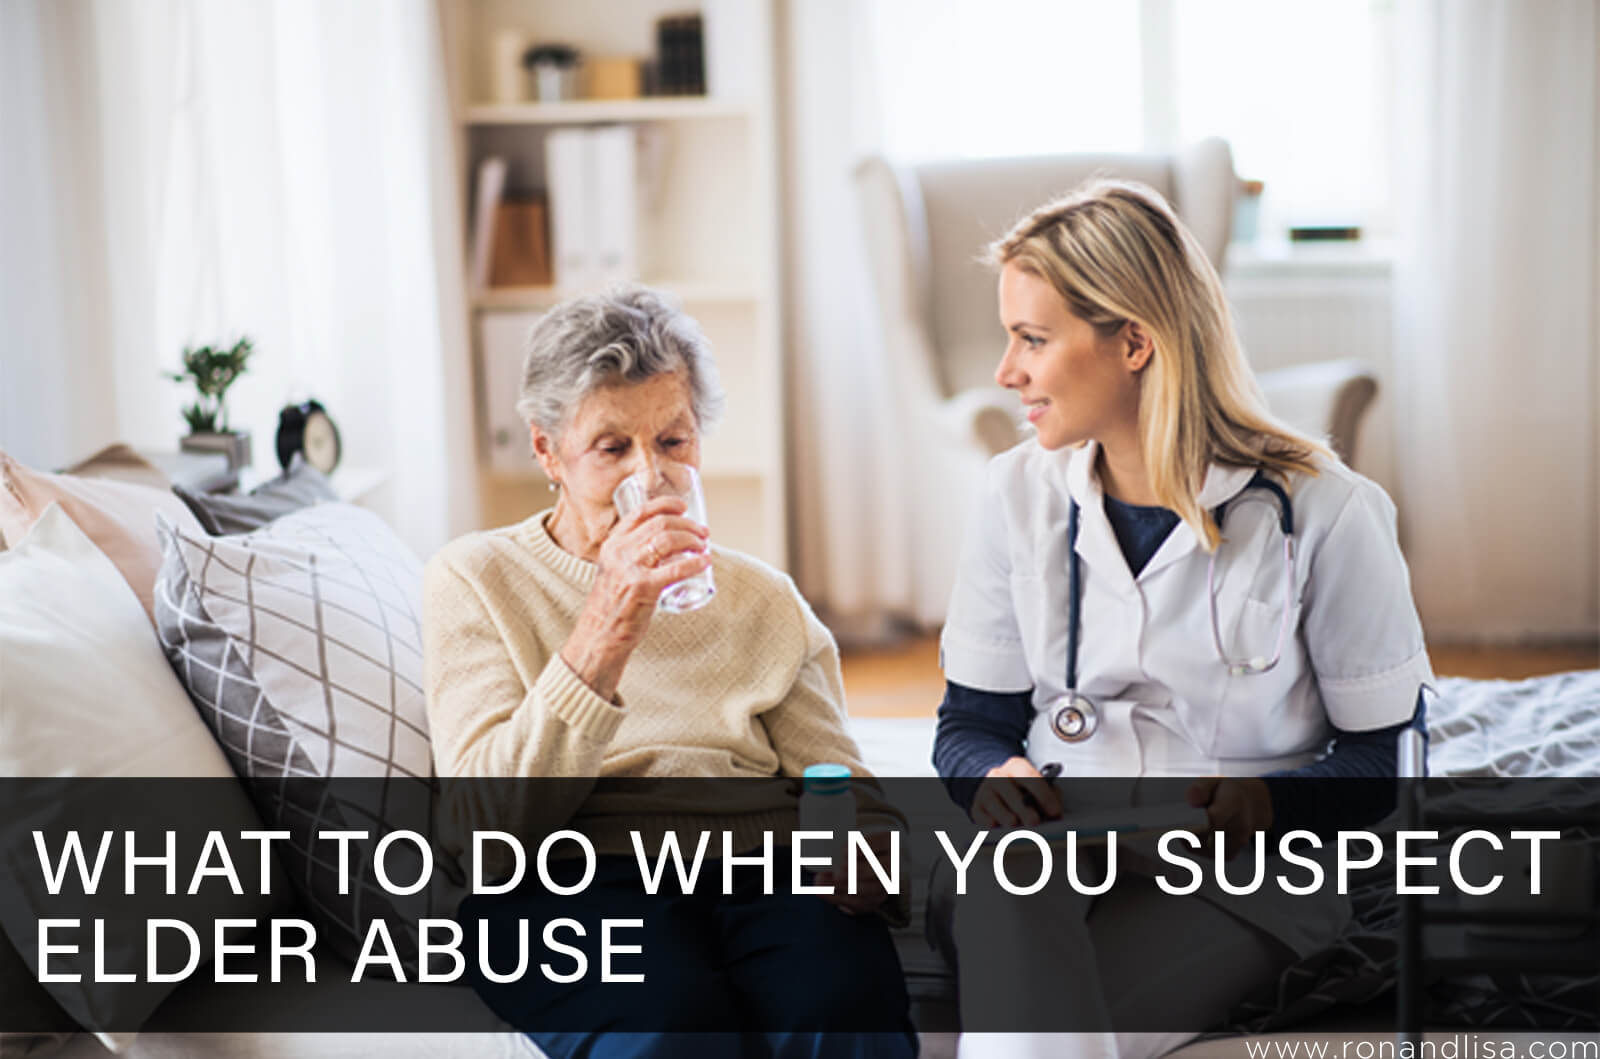 What To Do When You Suspect Elder Abuse